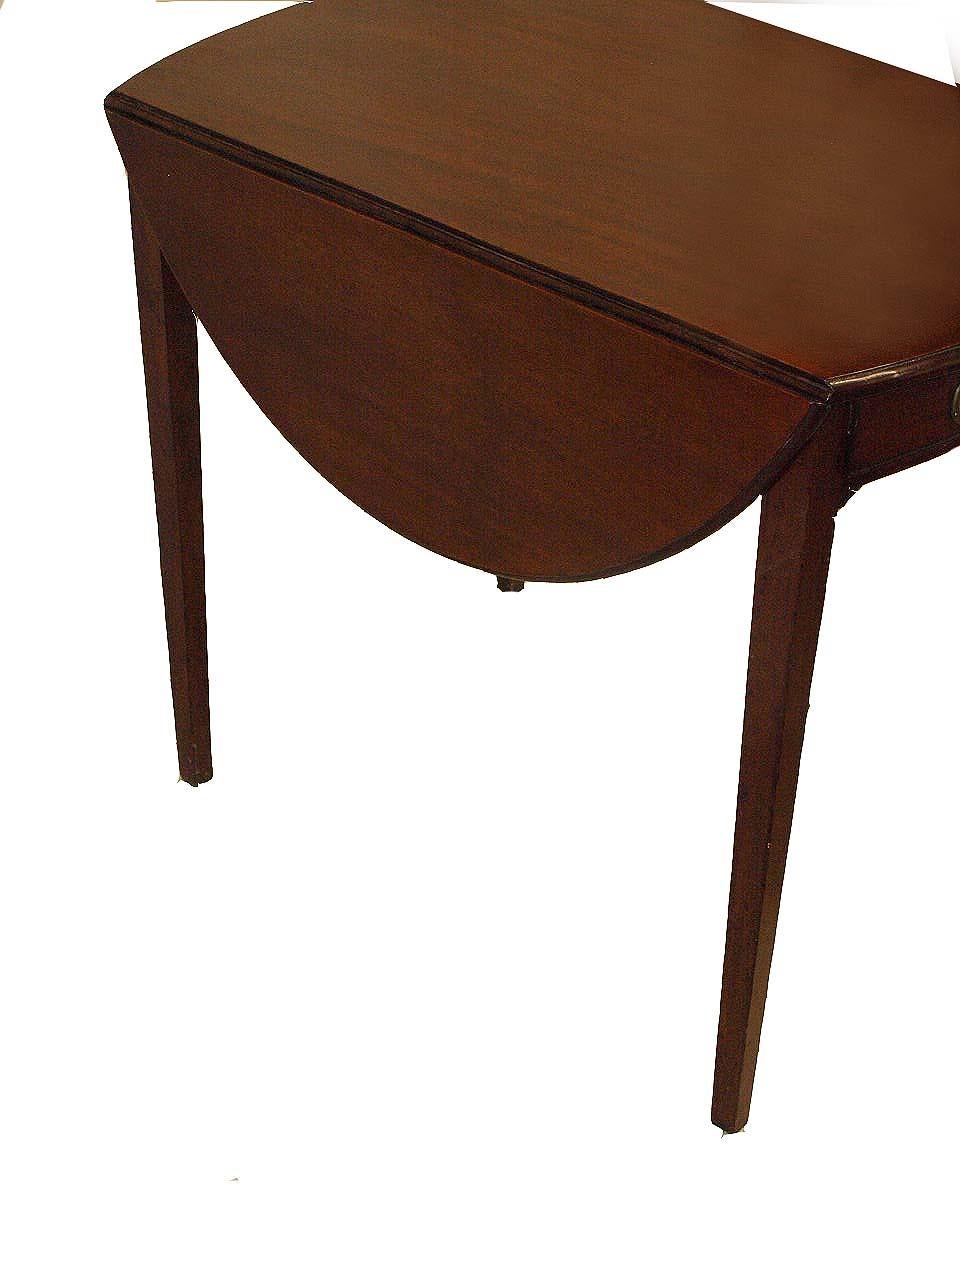 Oval Hepplewhite pembroke table, this table has a single drawer at one end and a faux drawer at the other, the drawers' secondary wood is oak, with the leaves up it is 41.5'' across. There are two very minor splits at one end of the table and a very